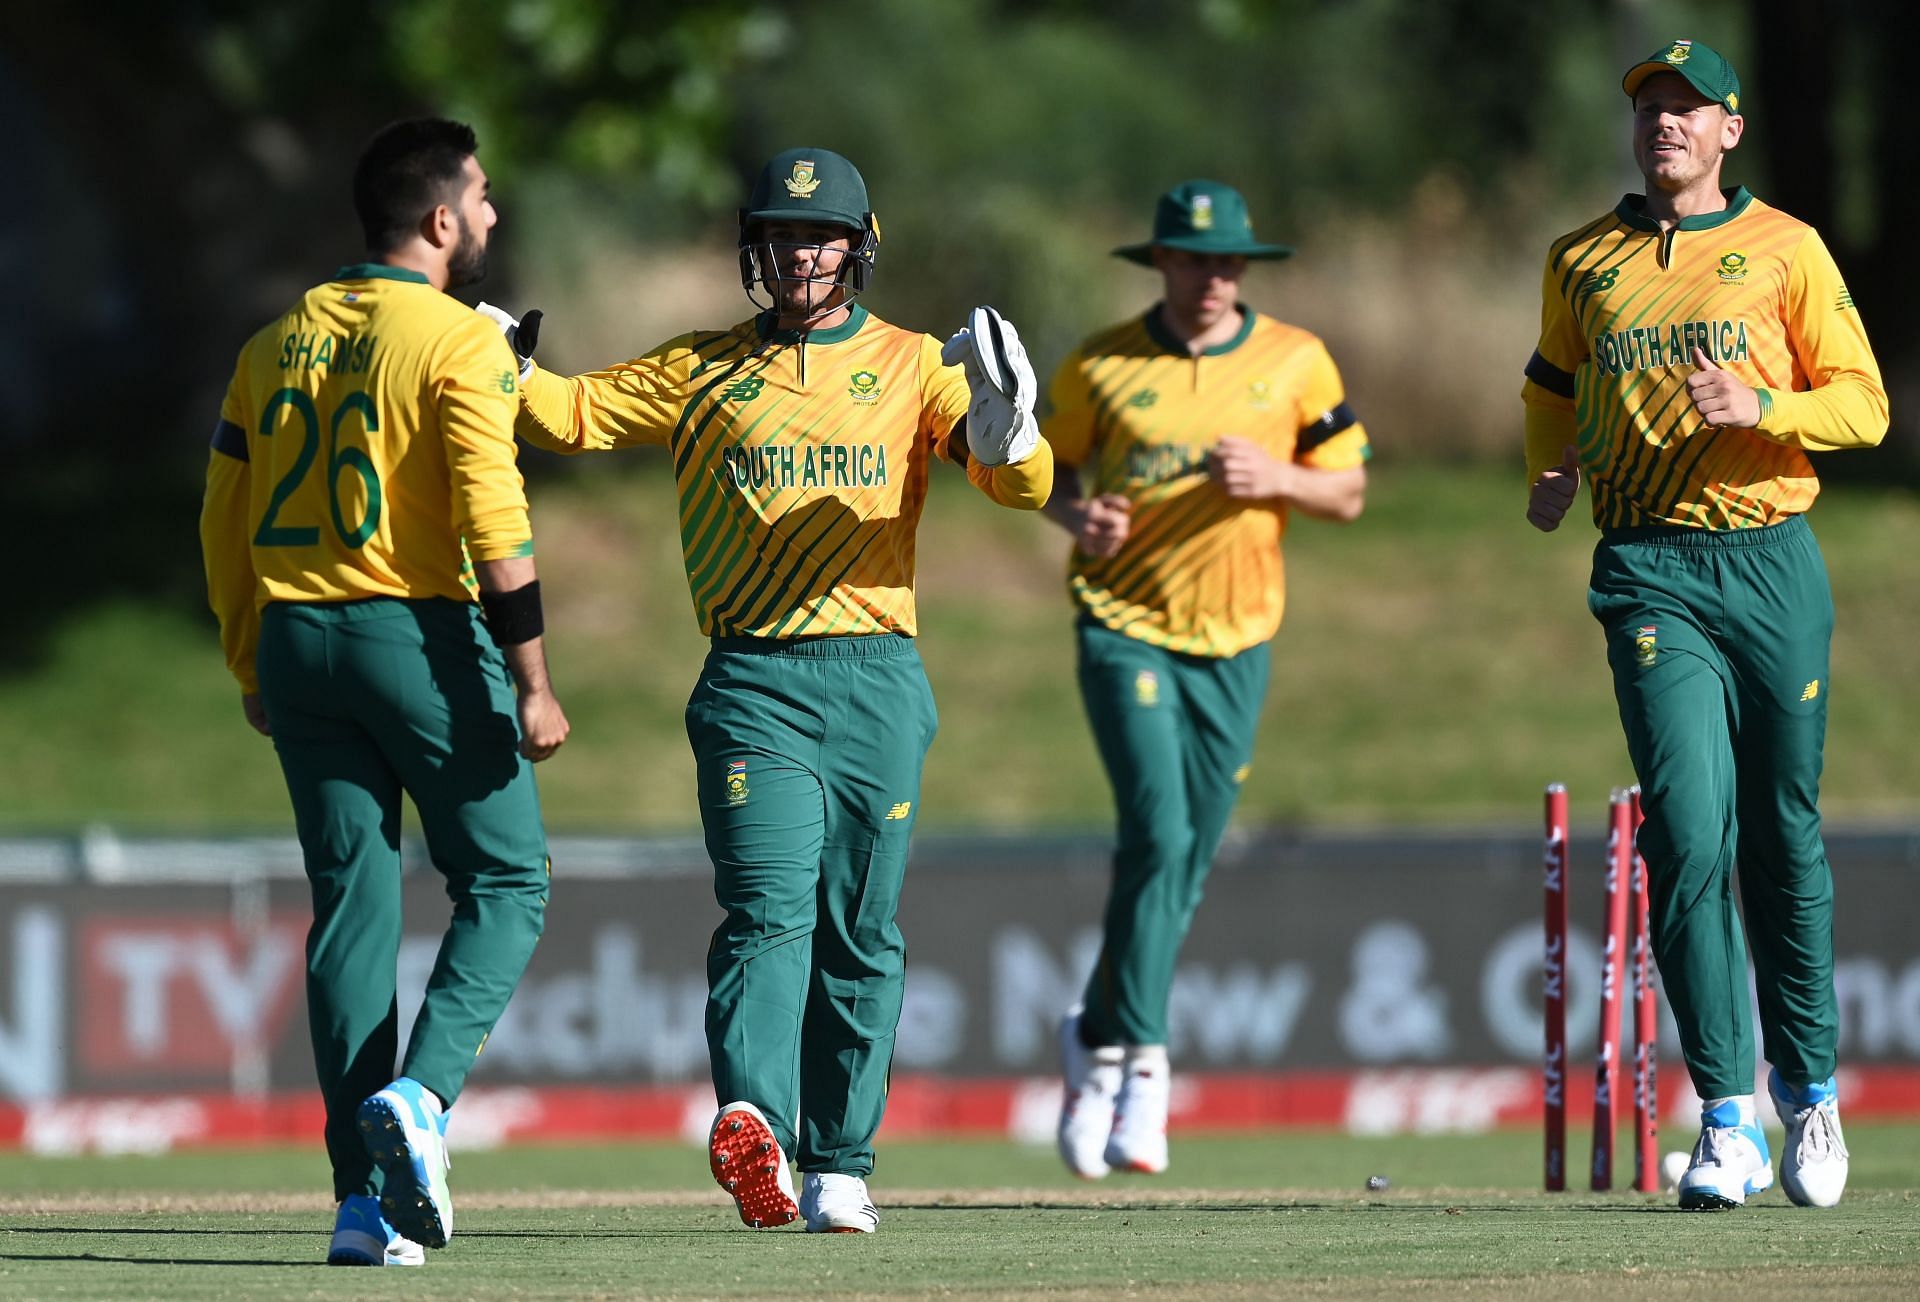 South Africa need to be at their best at the T20 World Cup